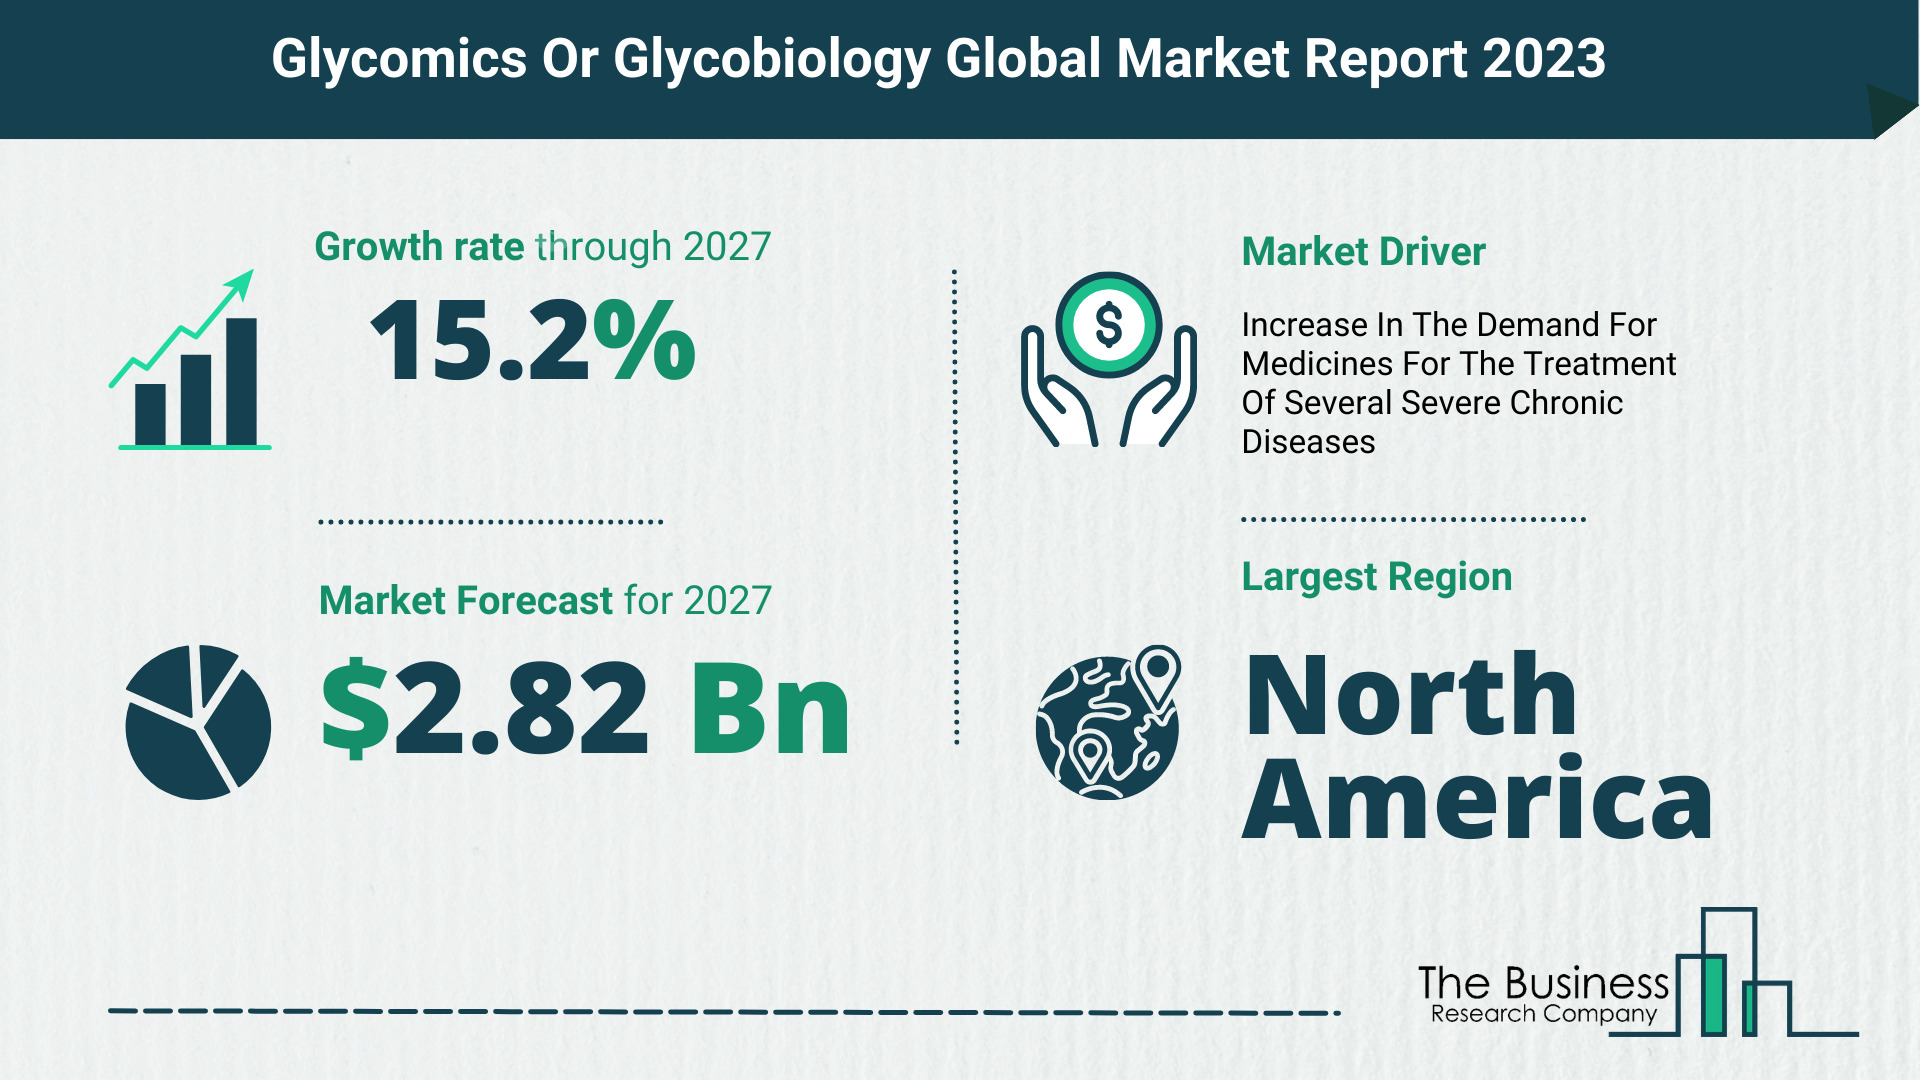 Glycomics Or Glycobiology Market Size, Share, And Growth Rate Analysis 2023